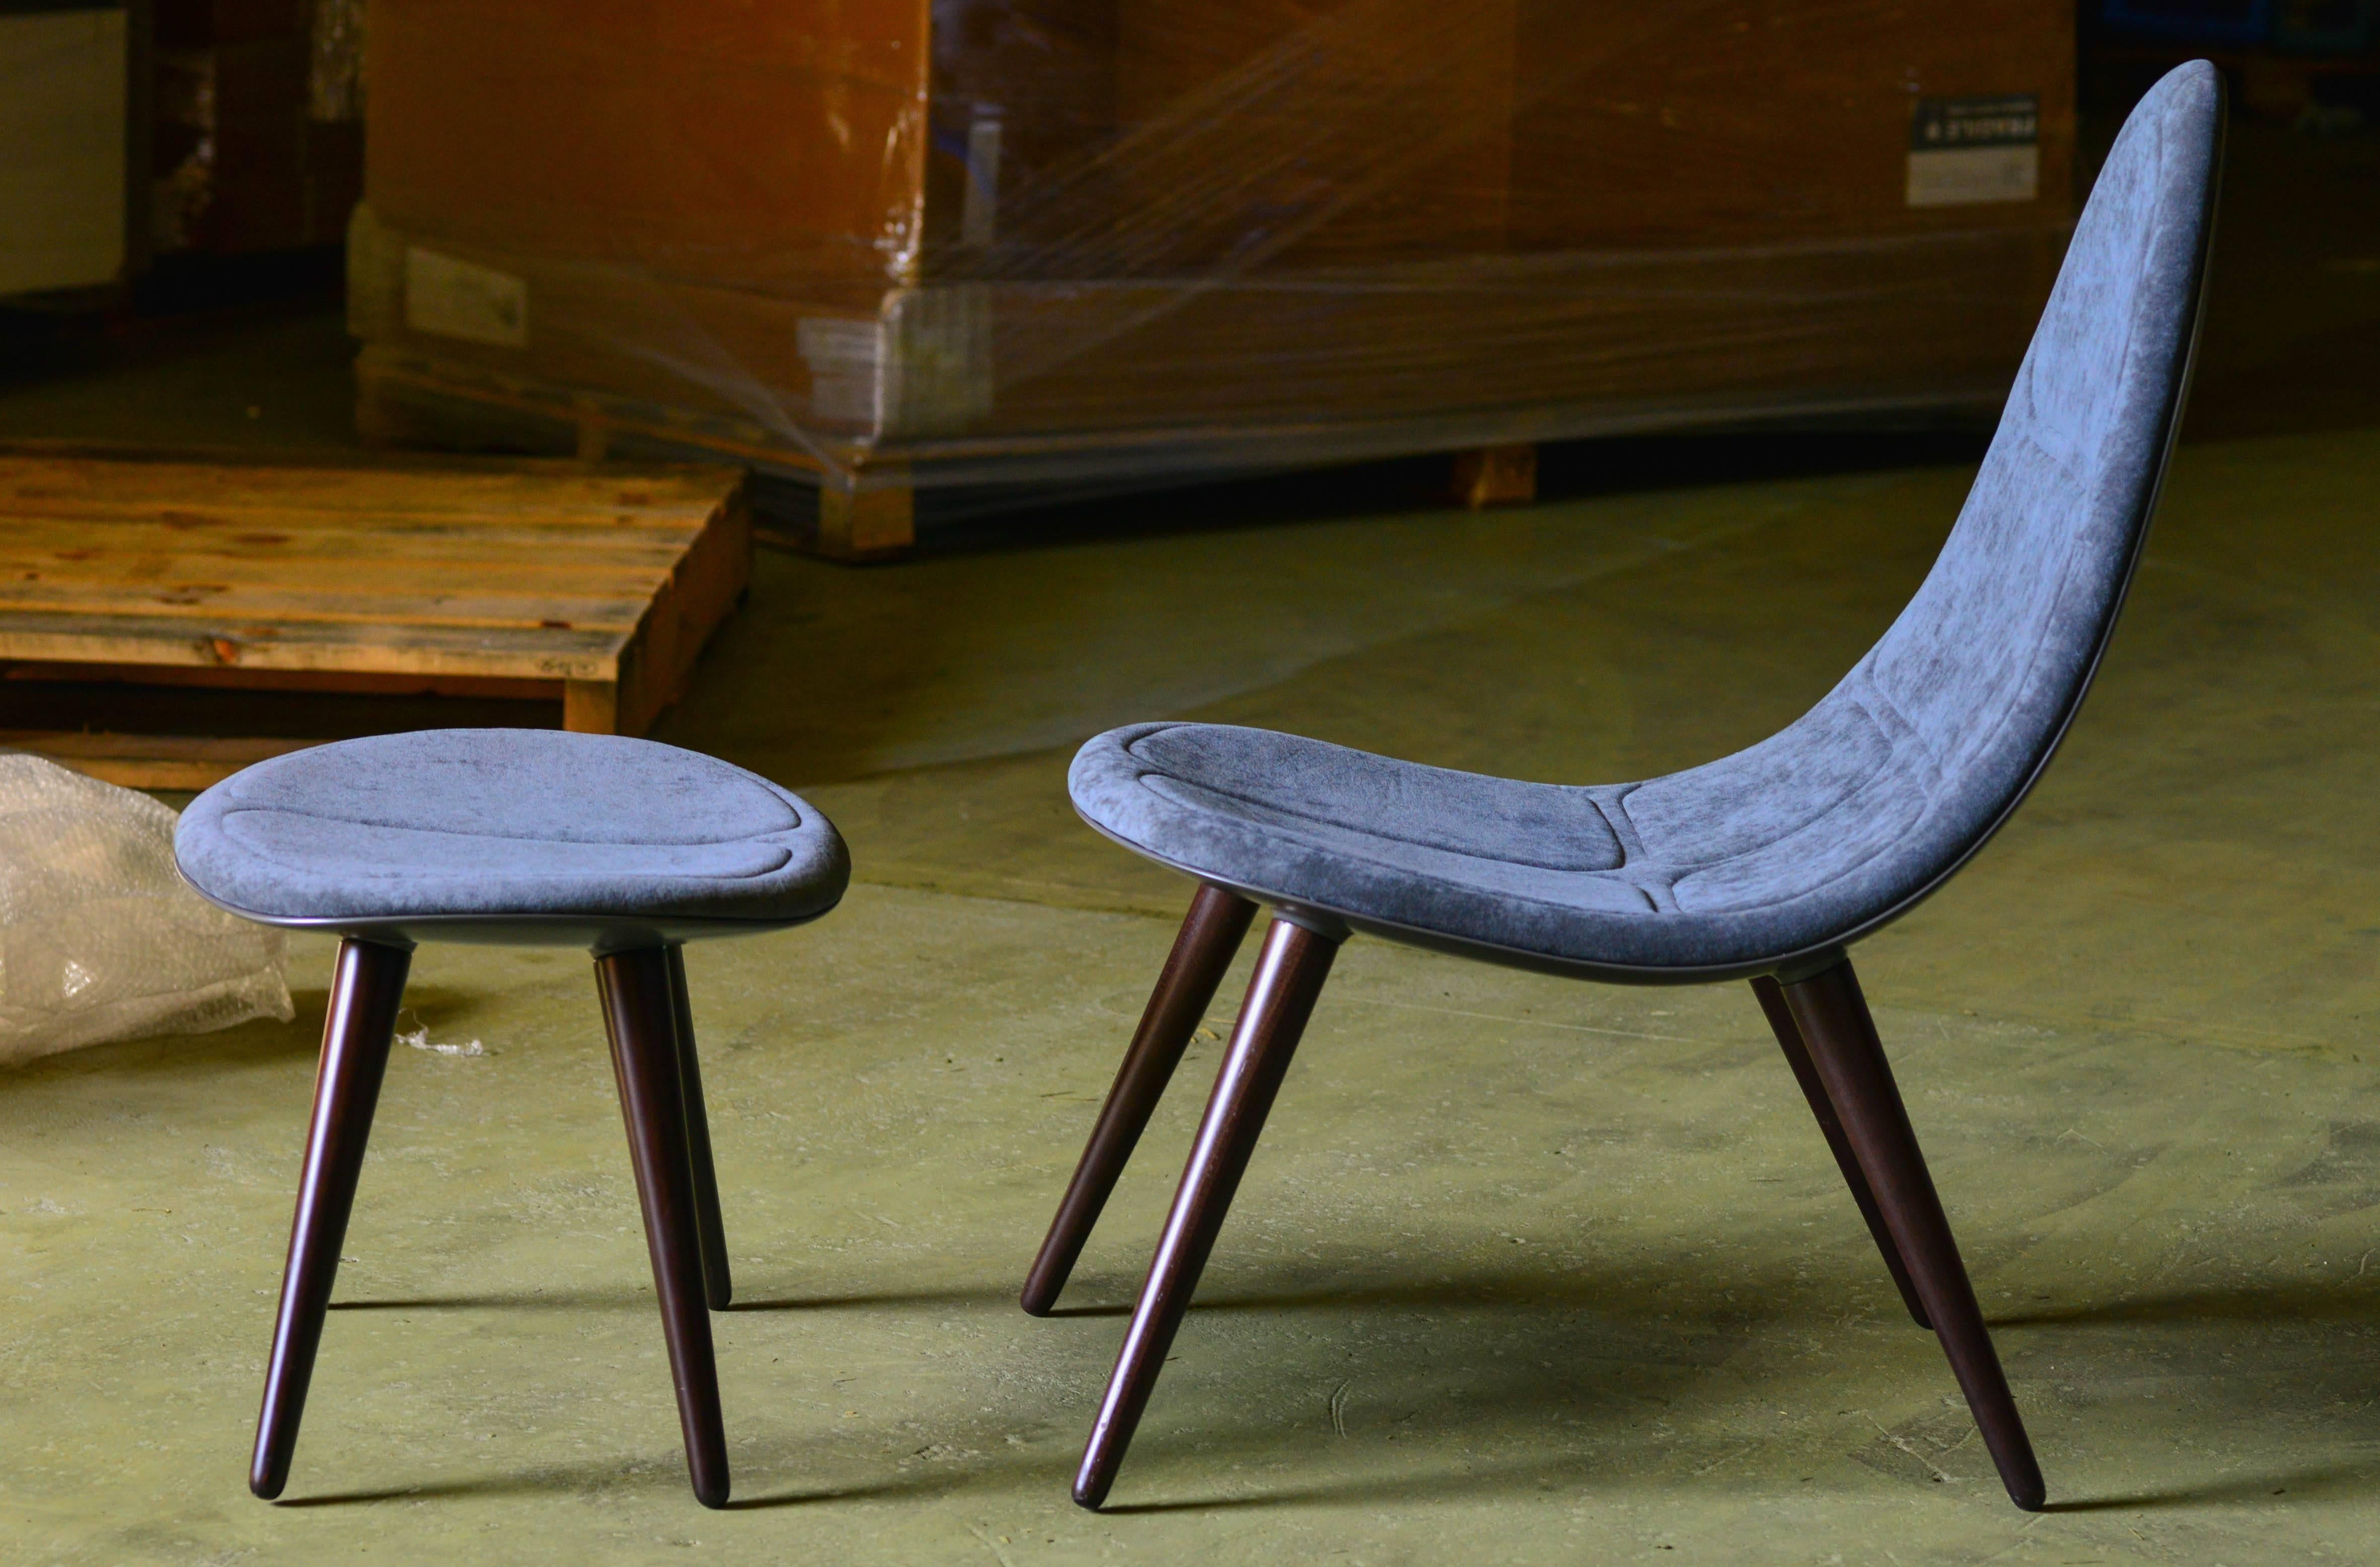 A contemporary lounge chair with a 1960s futuristic touch, this chair and ottoman are artisanally produced using a mix of materials-a moulded structure in fibre and resin and FR foam, ergonomic yet slim-lined. Upholstered in commercial grade heavy